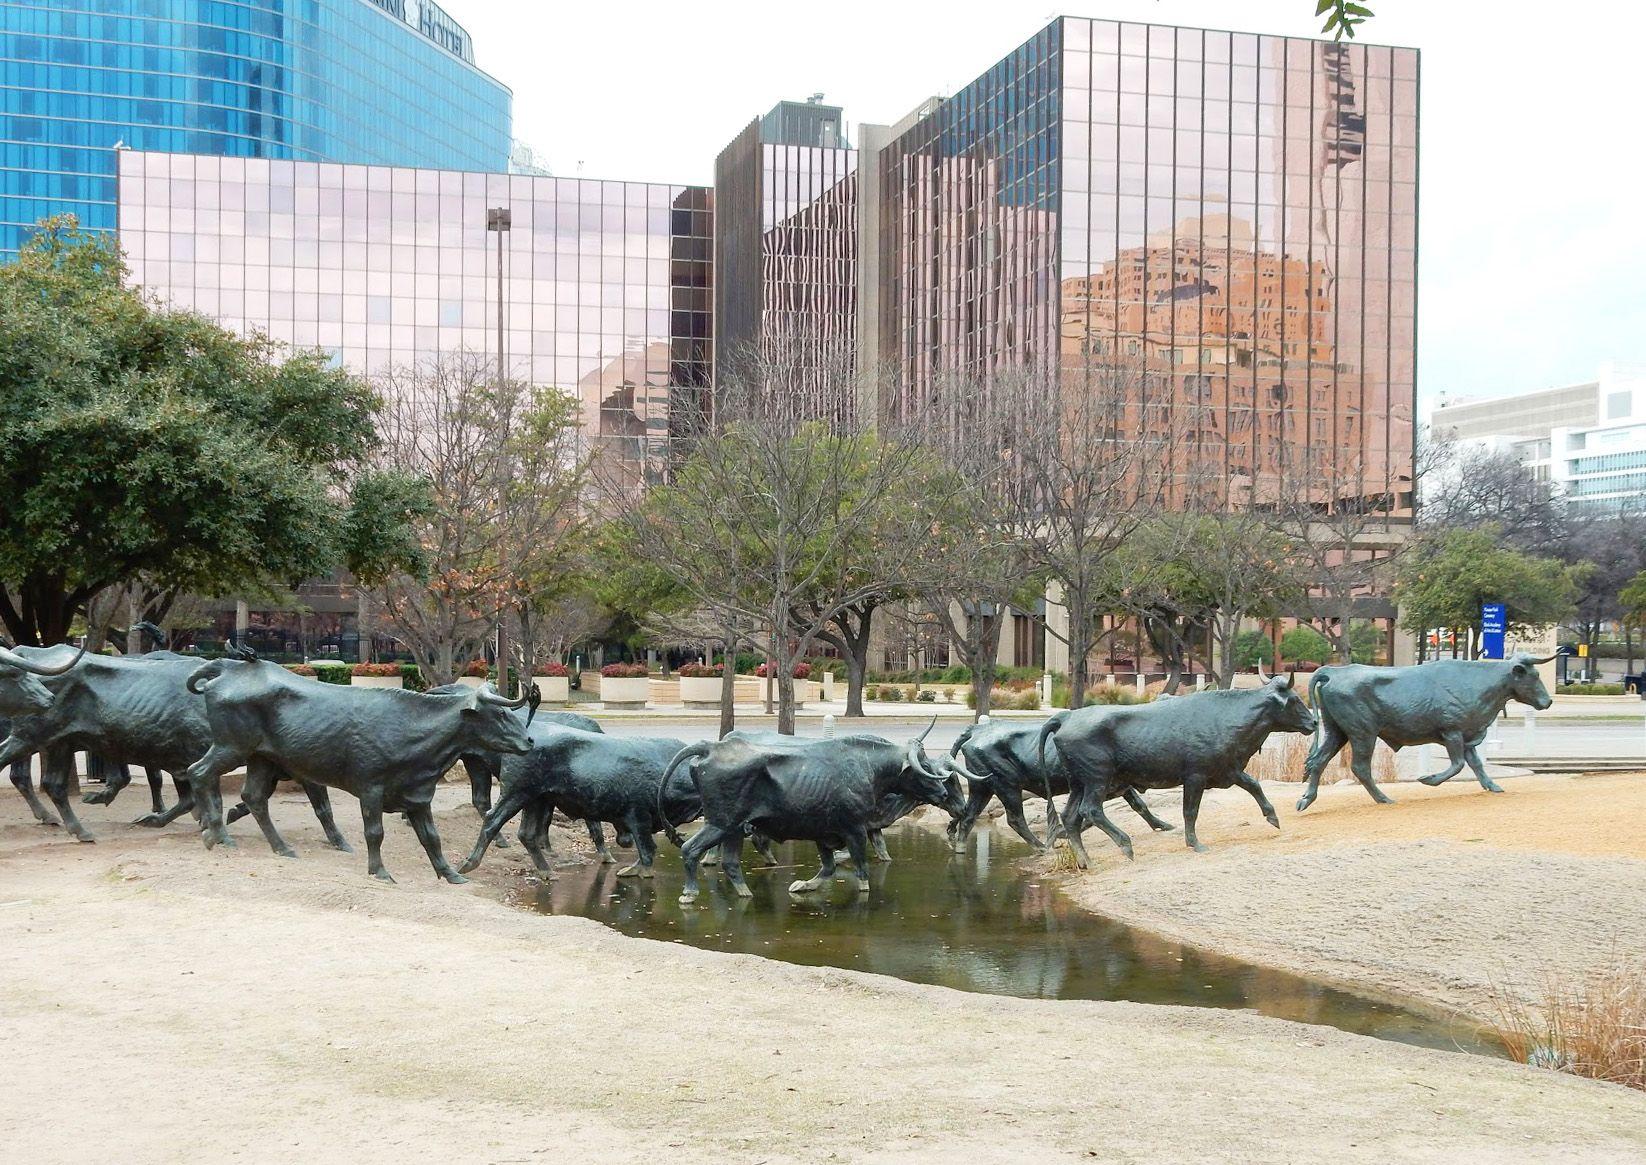 A display of several bronze bulls that look like they are running through a river.